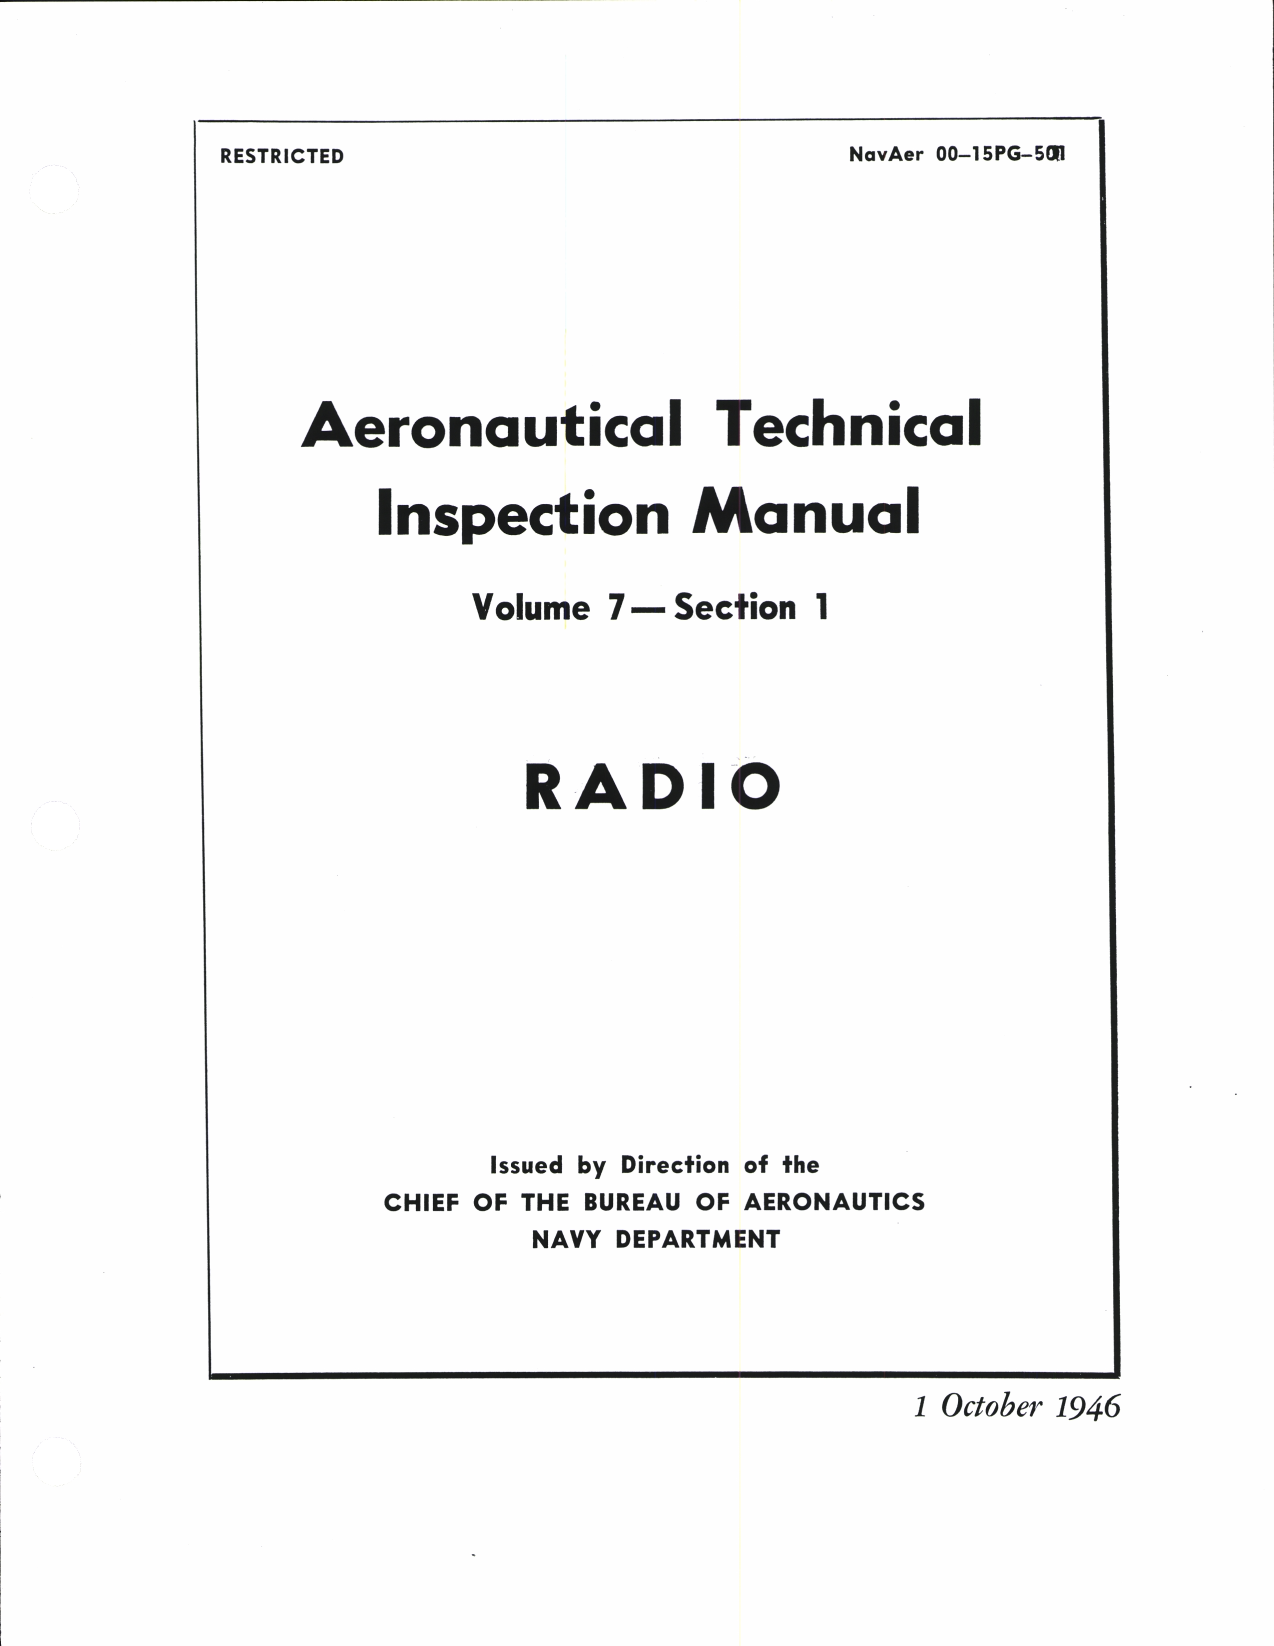 Sample page 1 from AirCorps Library document: Aeronautical Technical Inspection Manual - Radio